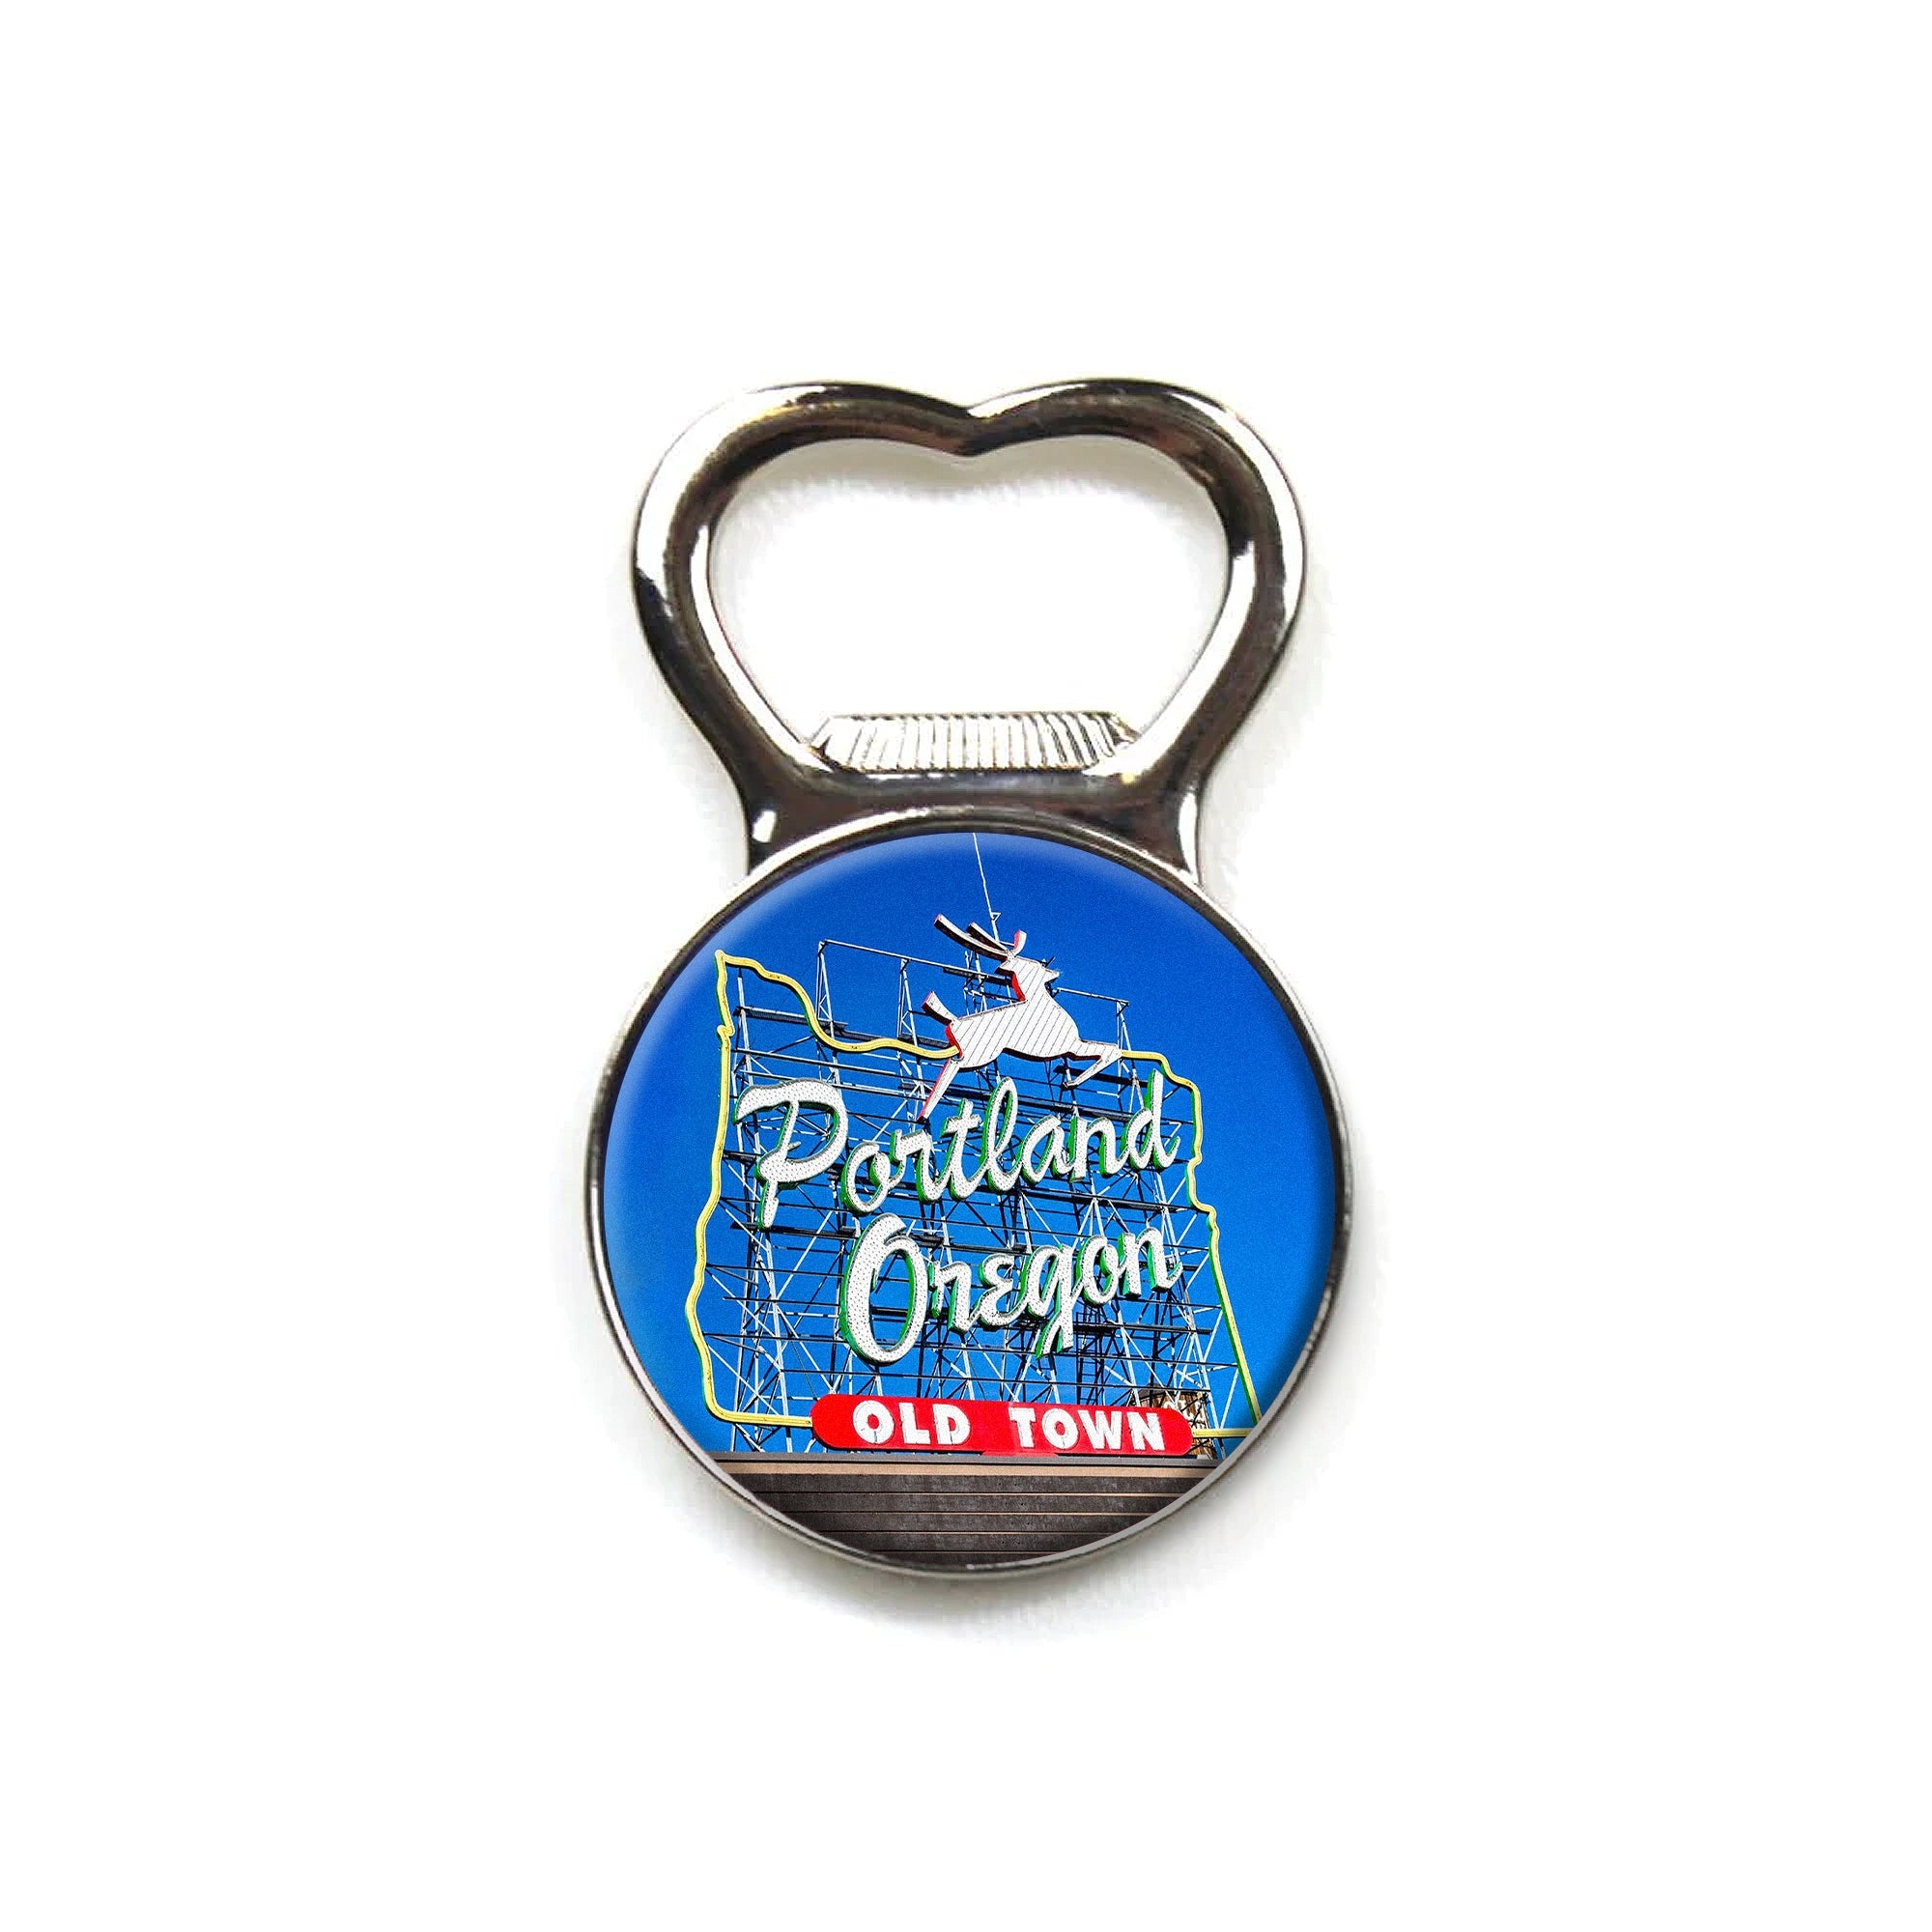 White Stag Bottle Opener Magnet - Magnets - Hello From Oregon